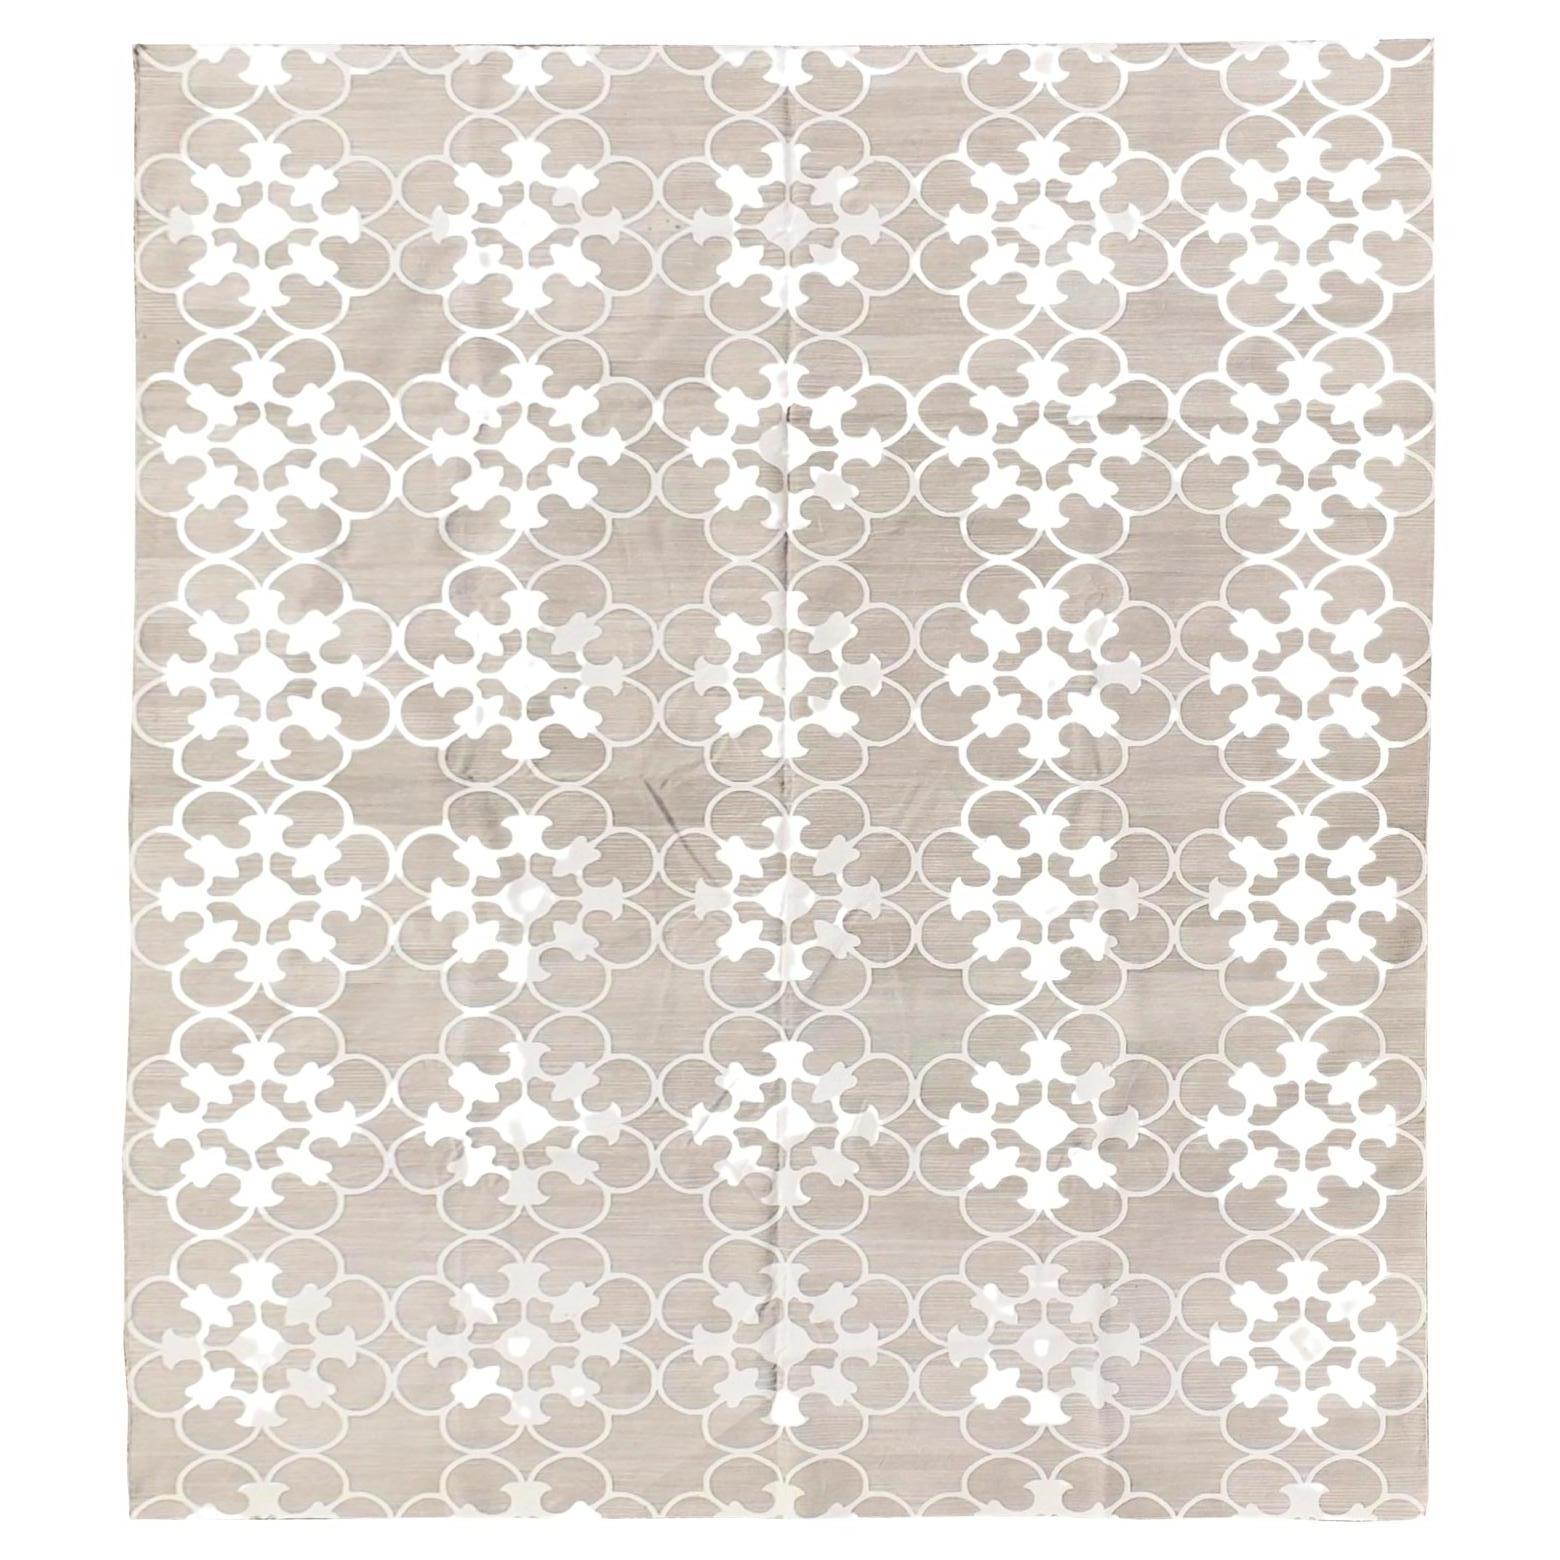 Vintage Madeline Weinrib Geometric Cotton Rug in White and Grey